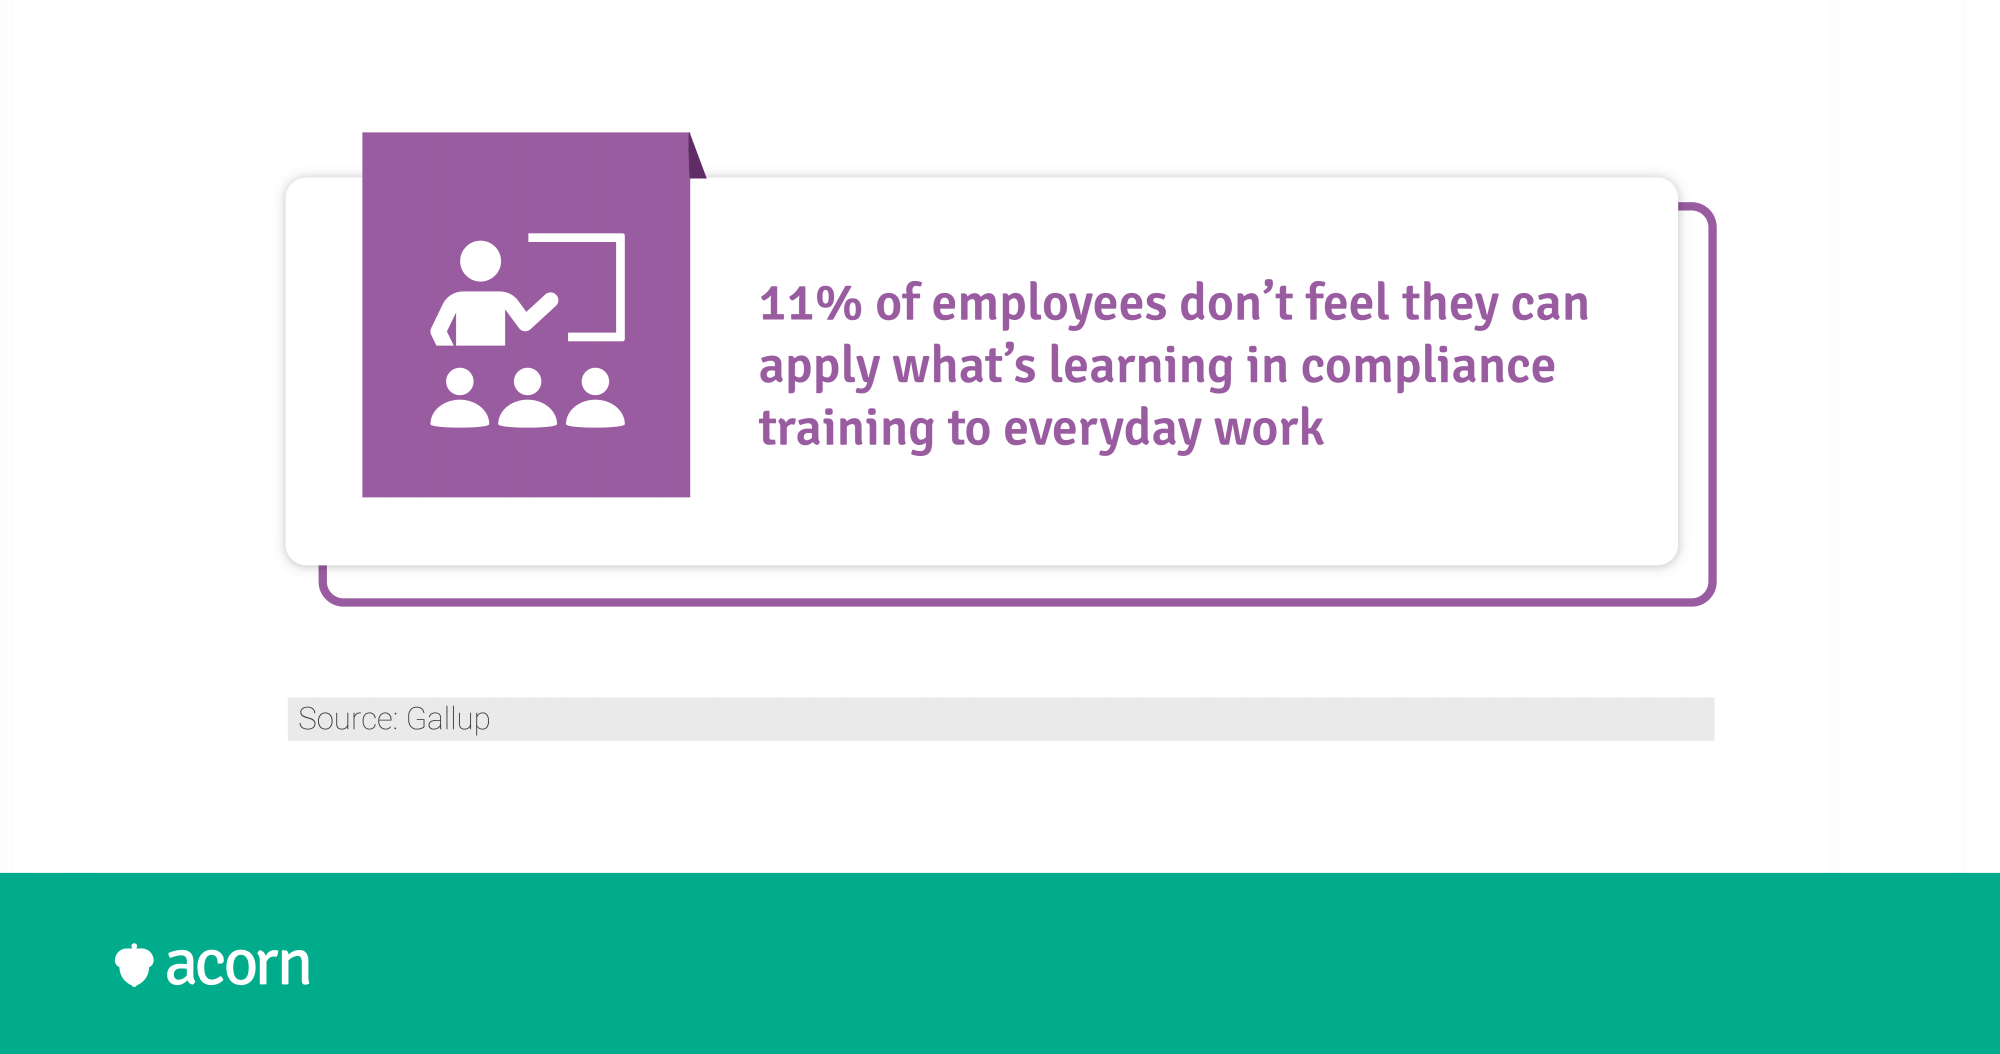 statistic showing 11% of employees can't apply compliance knowledge